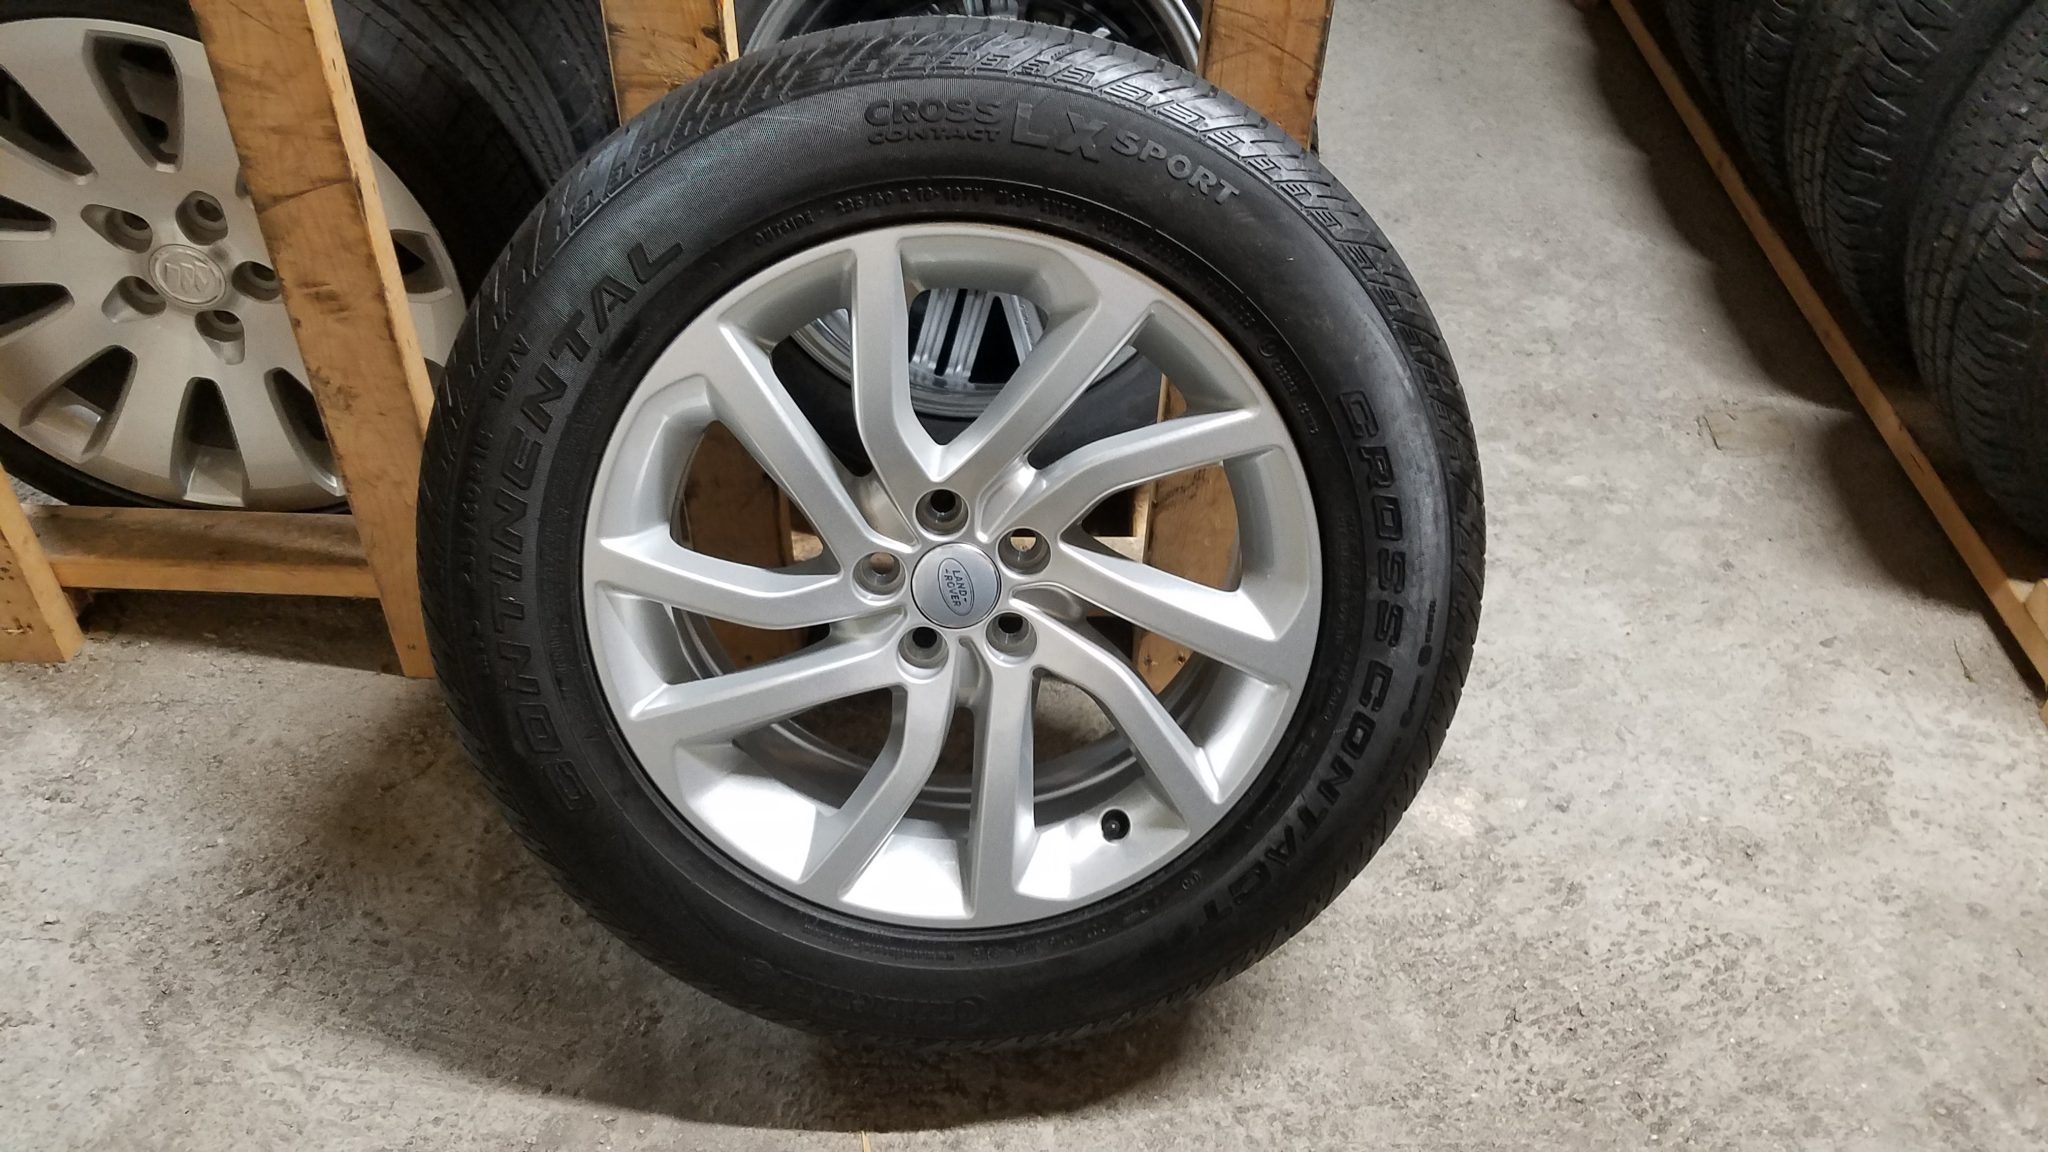 Single Land Rover Discovery Sport 2015 2016 2017 2018 18" OEM Rim Wheel Tire – AllOEMRims.com Tires For 2016 Land Rover Discovery Sport